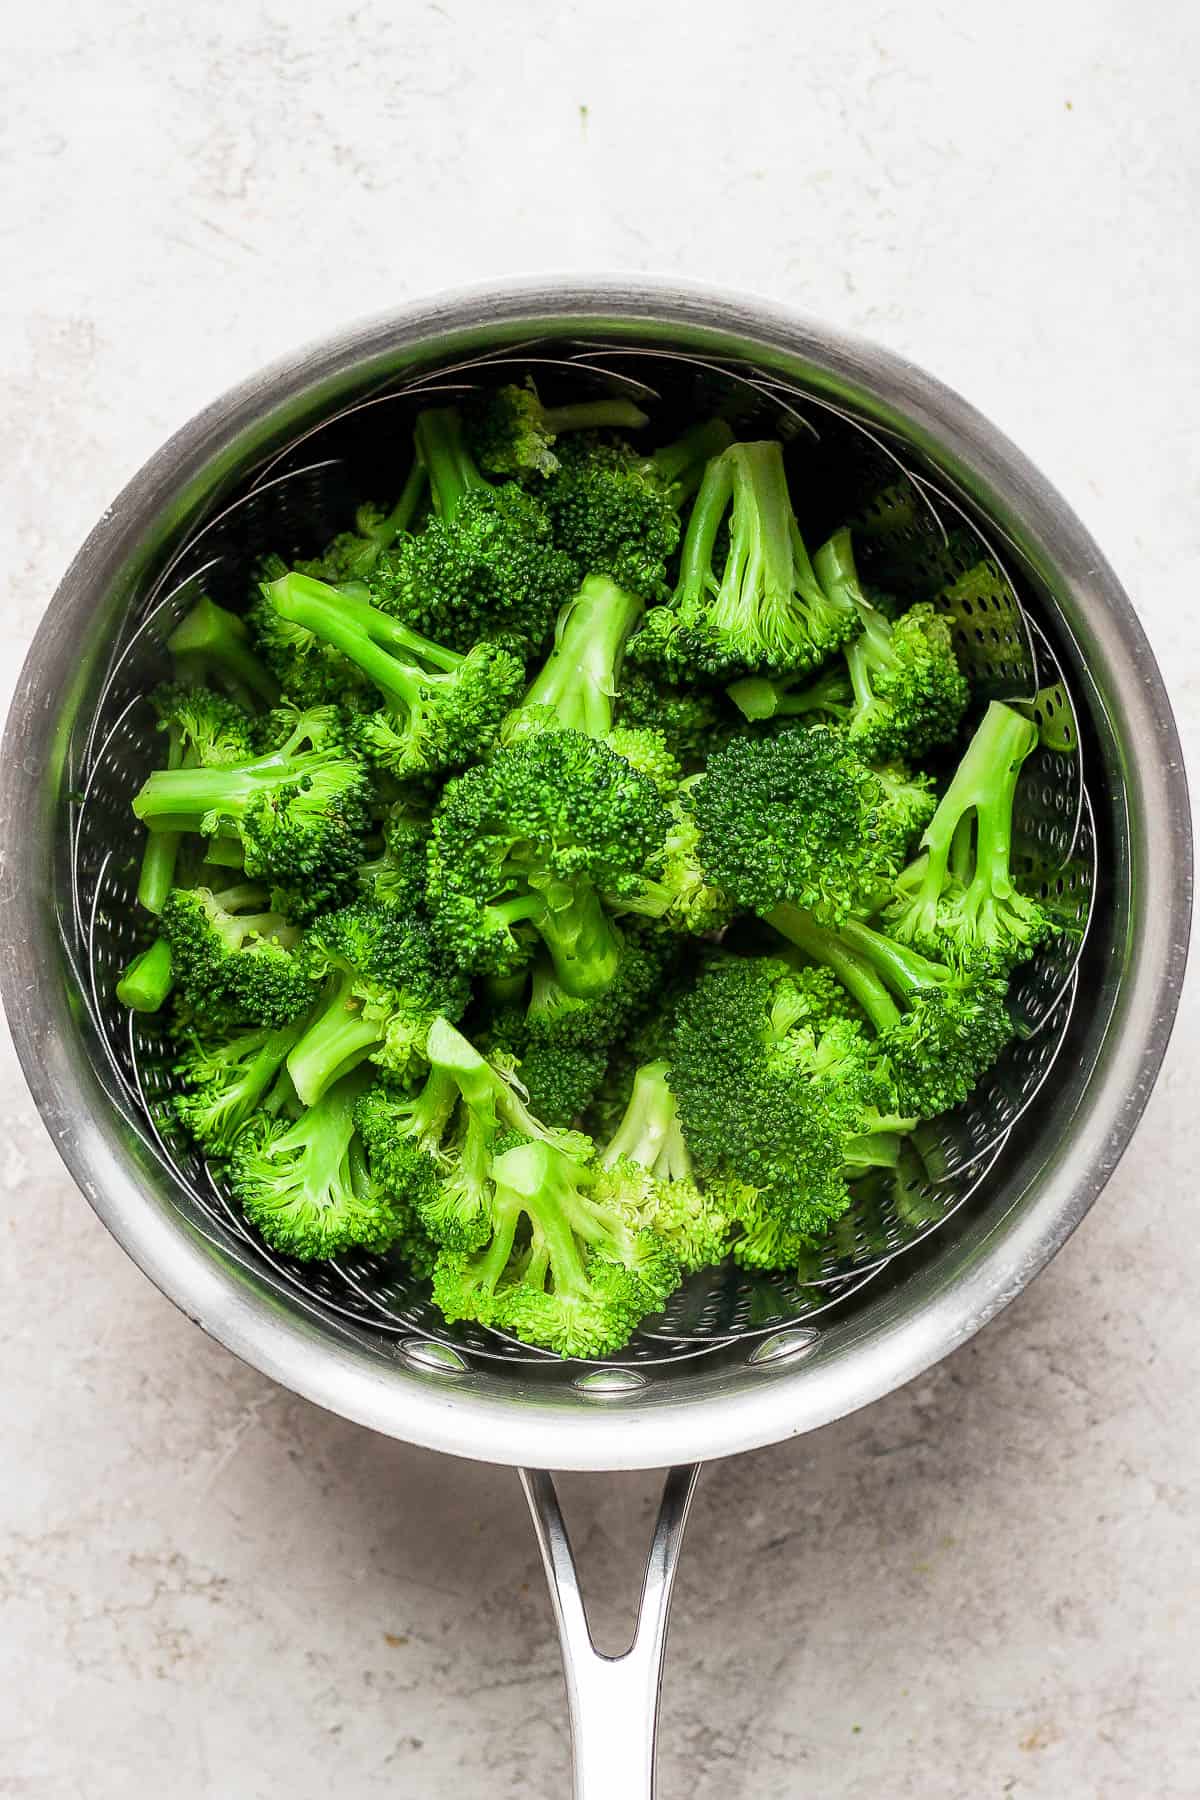 Broccoli florets steamed in a pan.